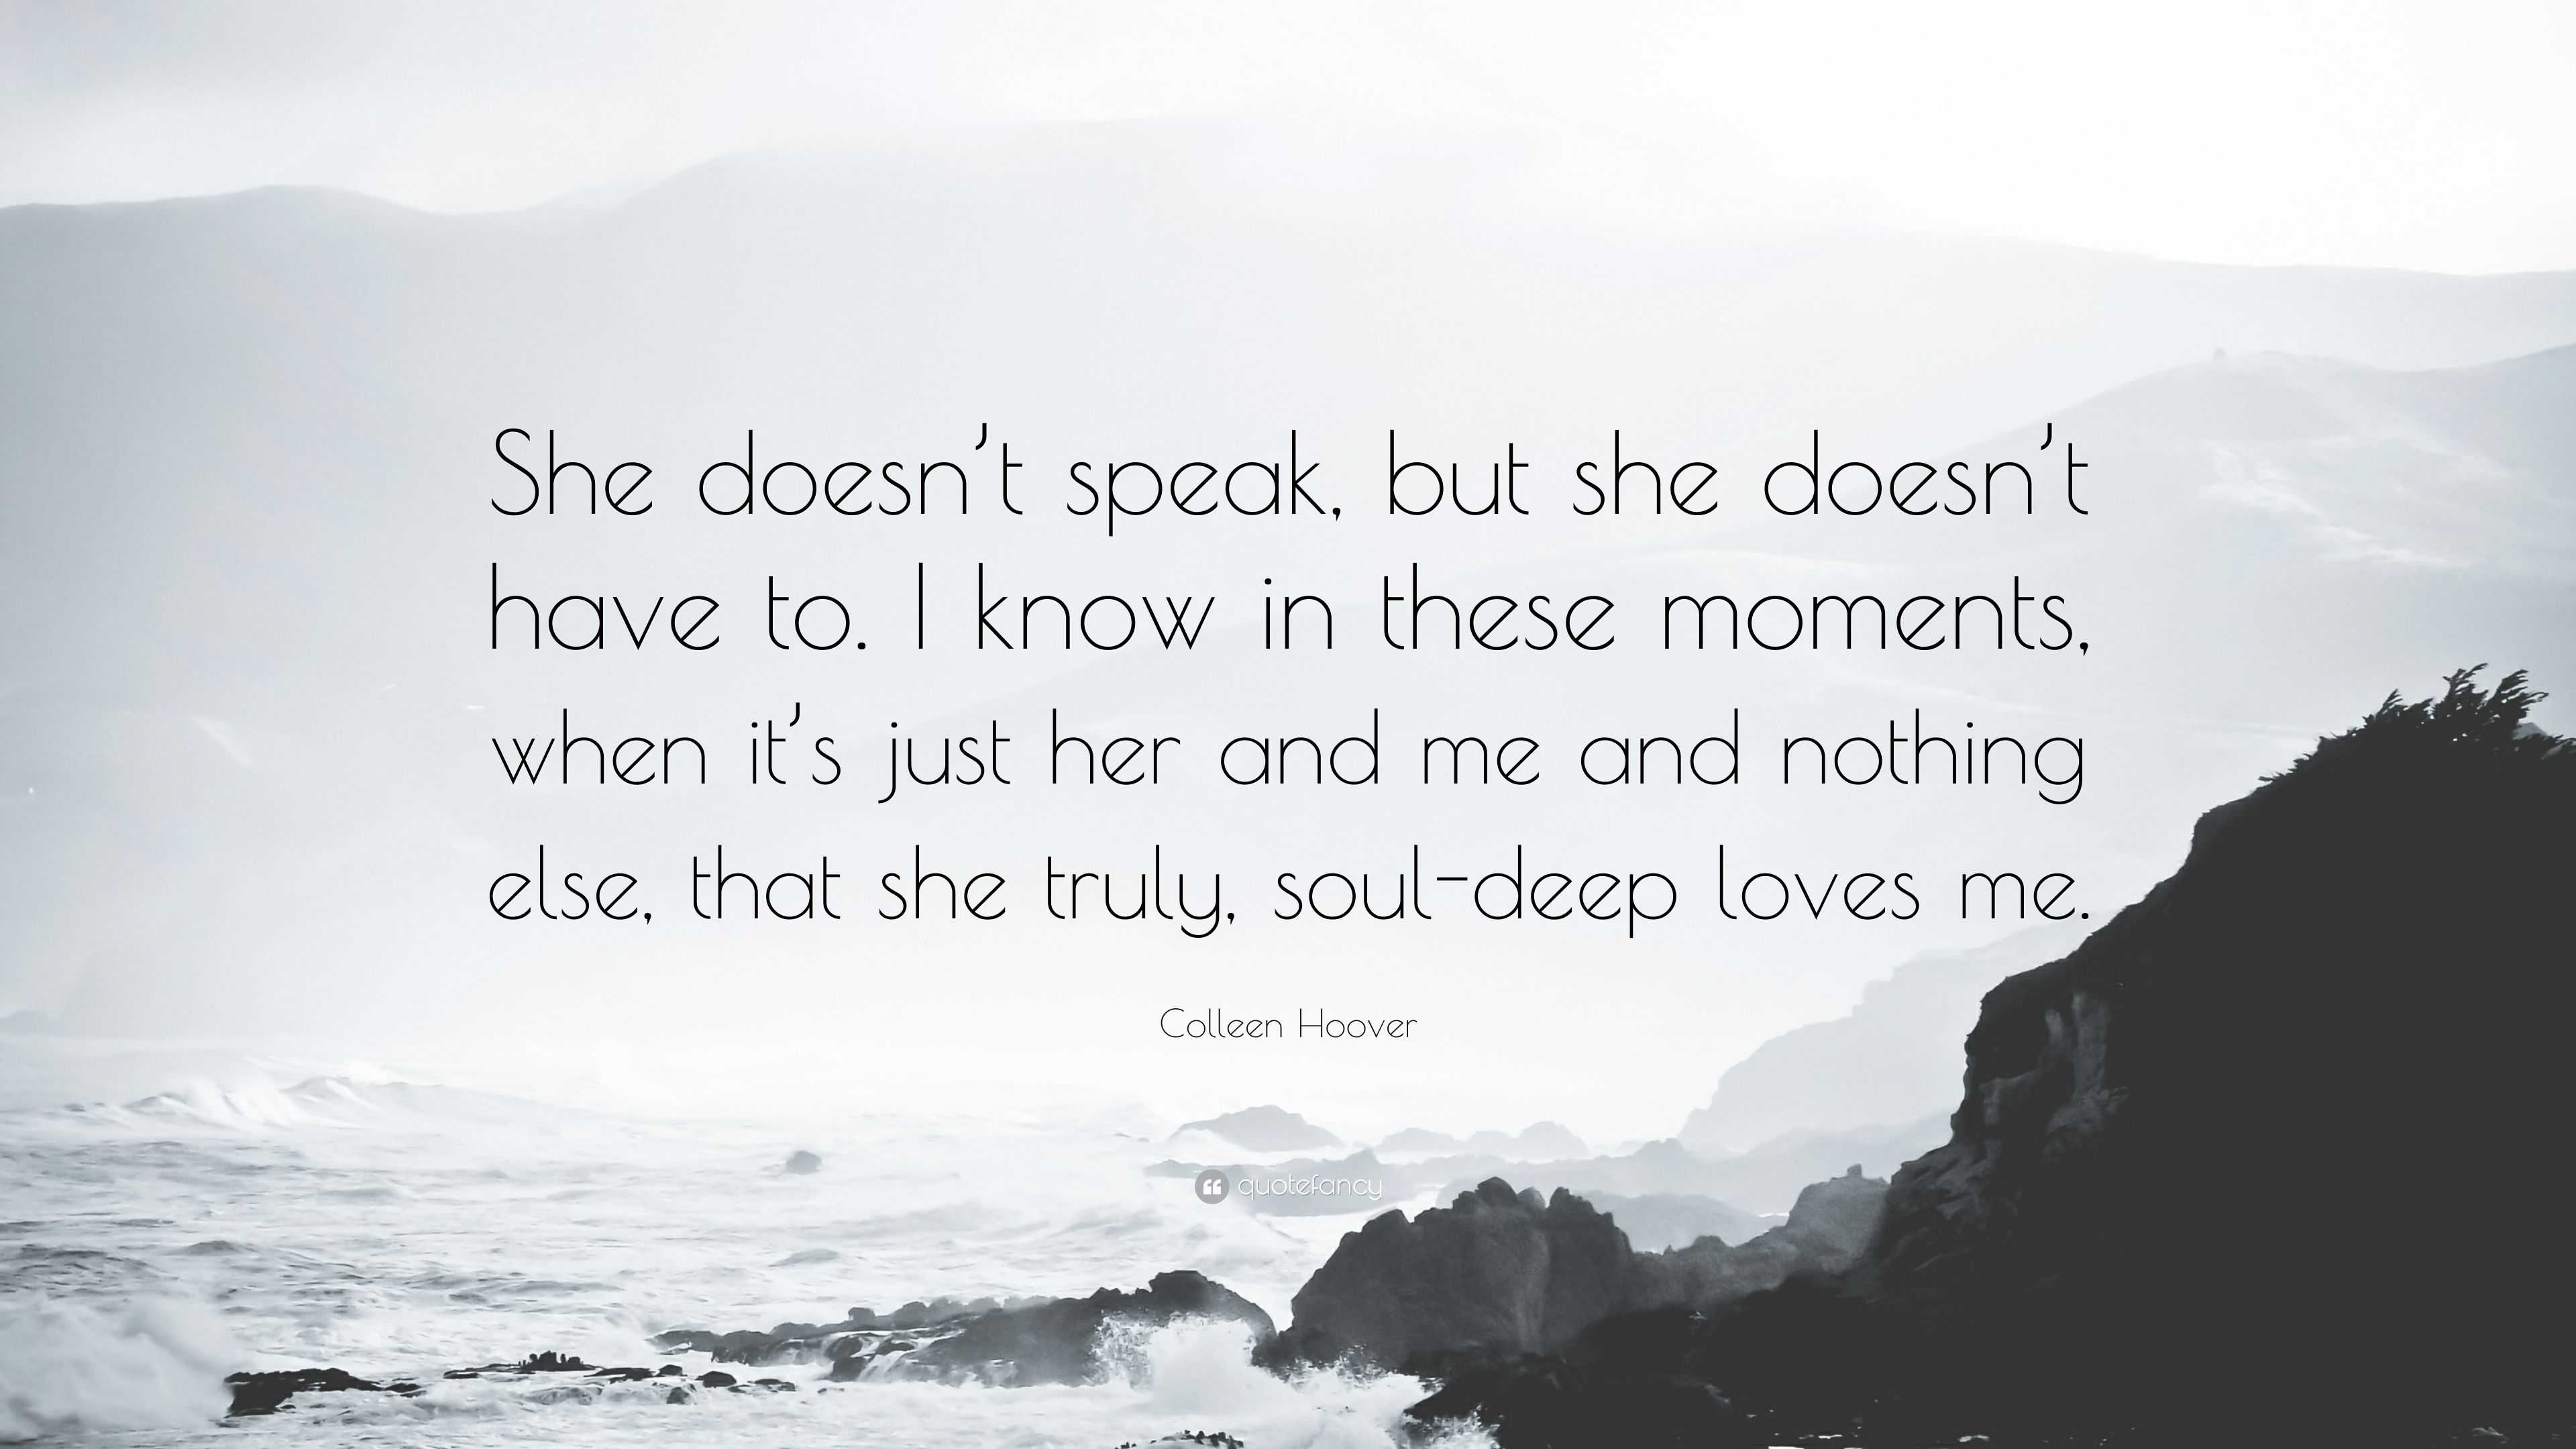 Colleen Hoover Quote “She doesn t speak but she doesn t